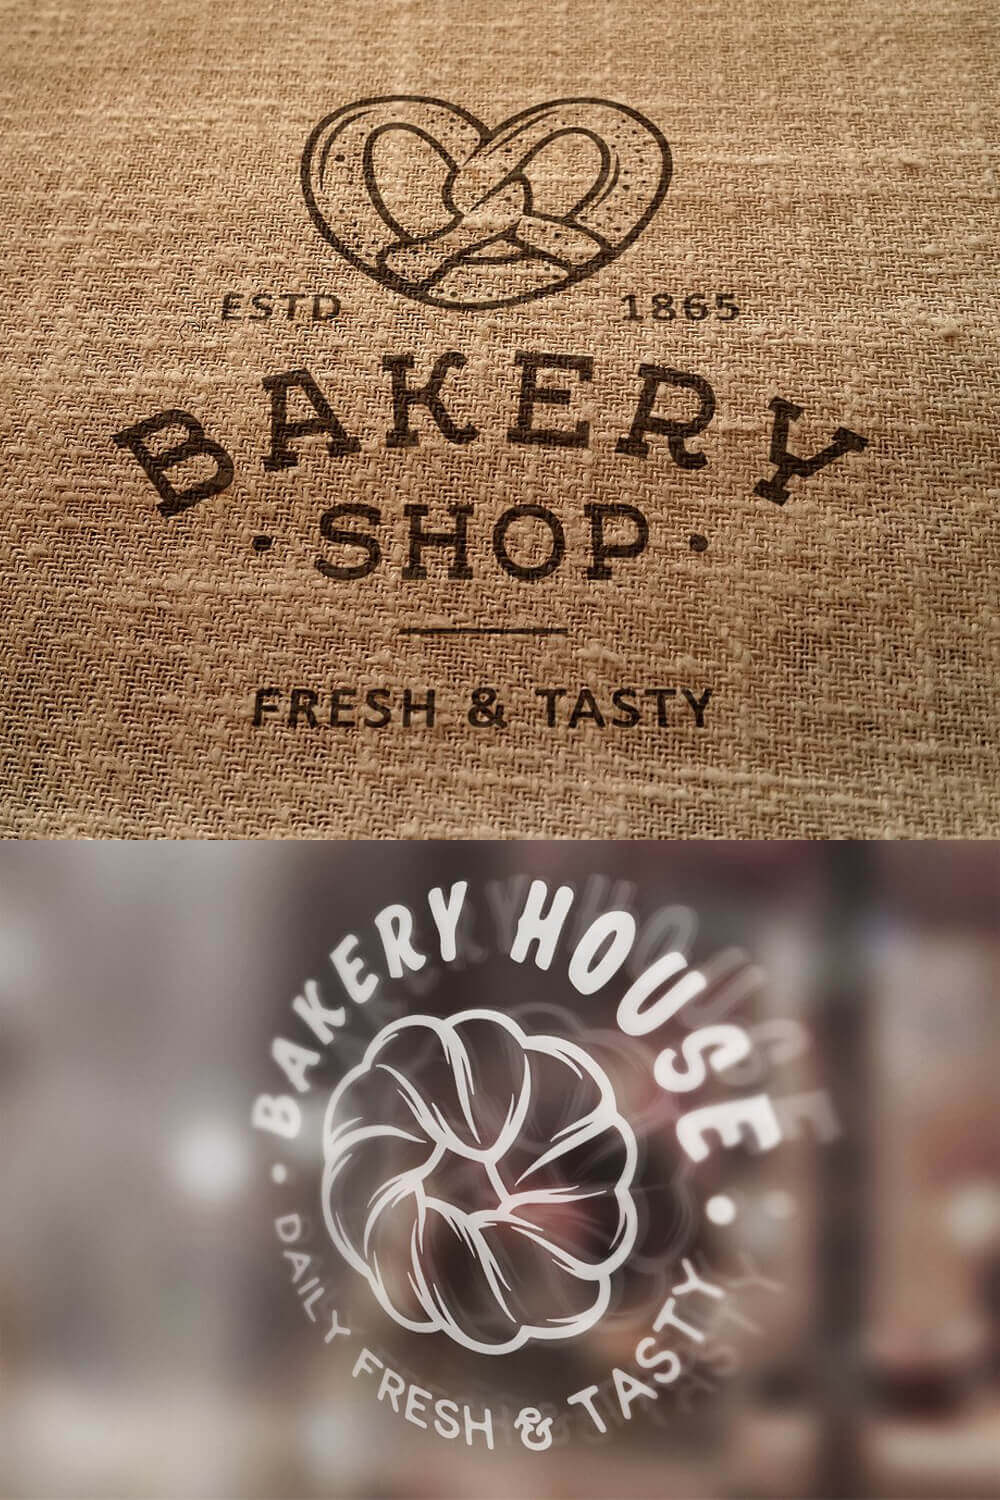 Two logos with elements of a bakery on a background of burlap and a blurred background.